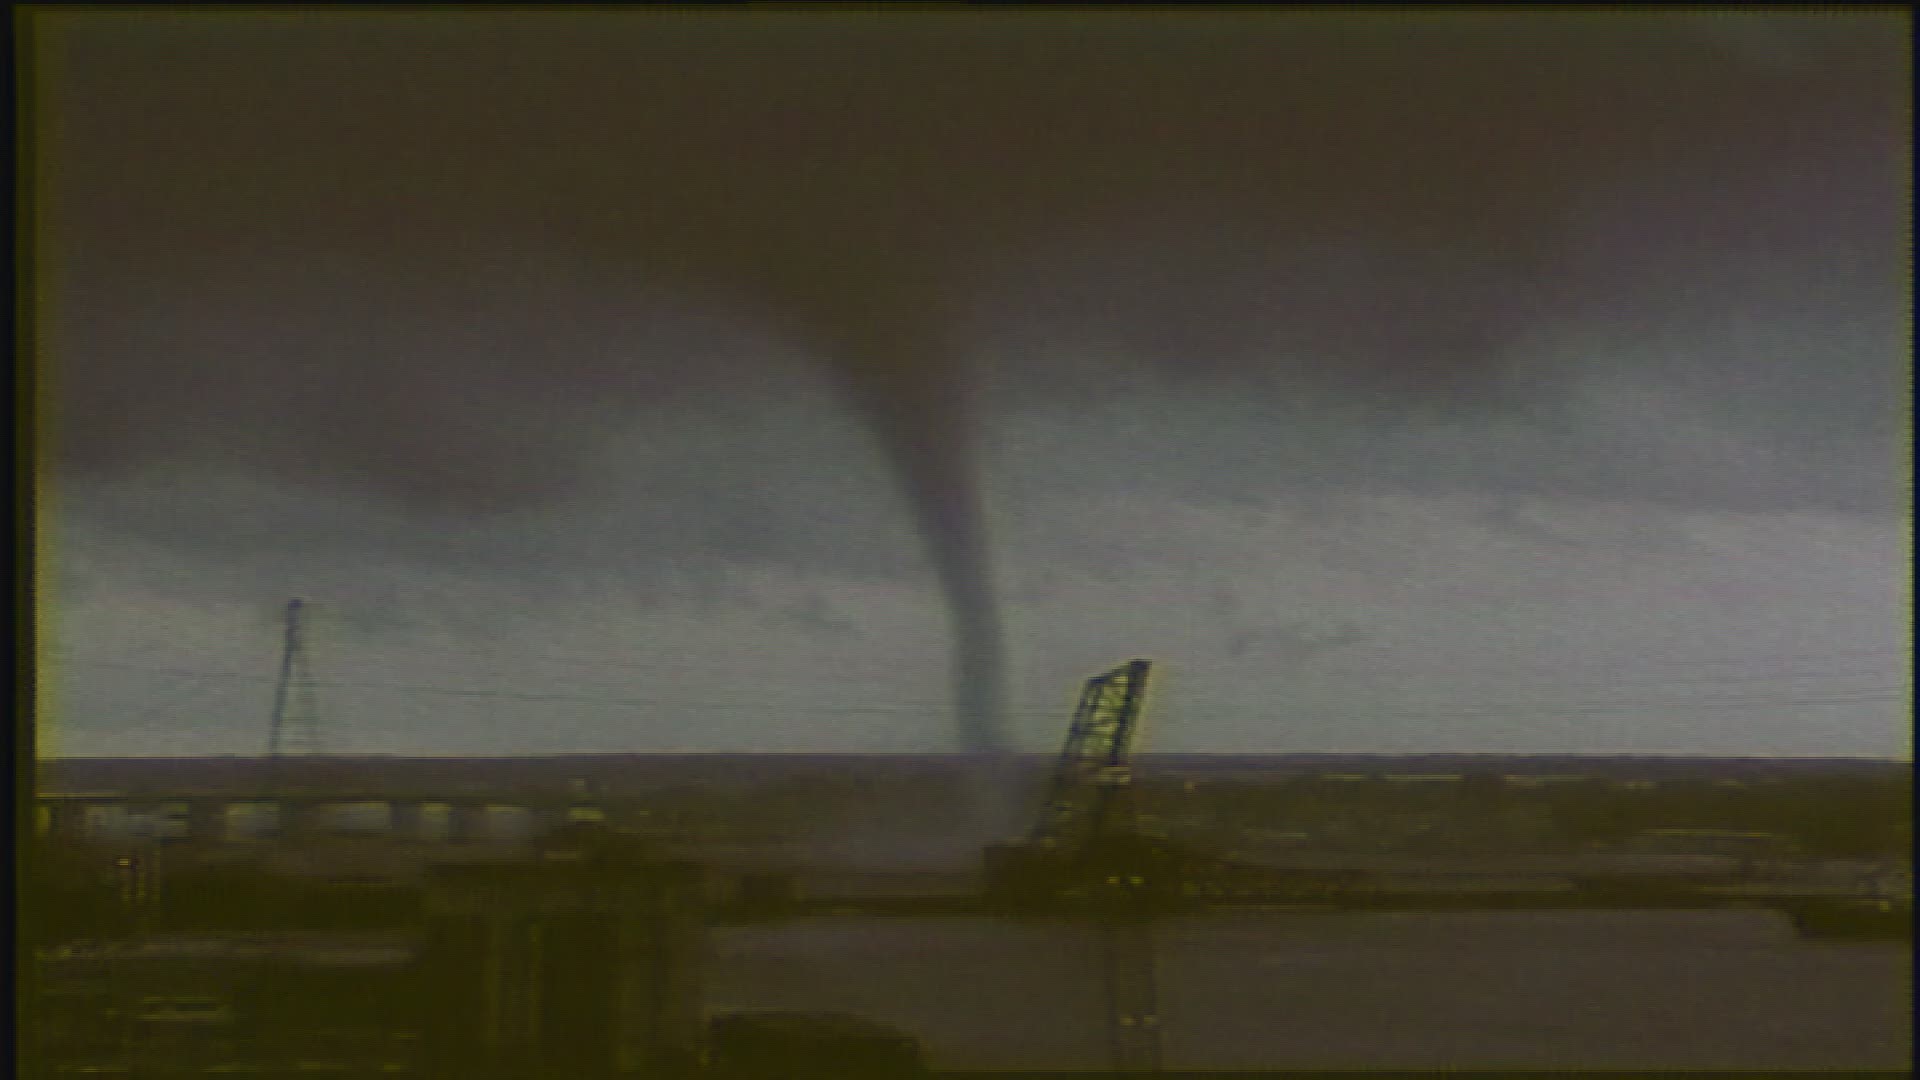 The remnants of Hurricane Danny produced several tornadoes in Hampton Roads back in 1997.